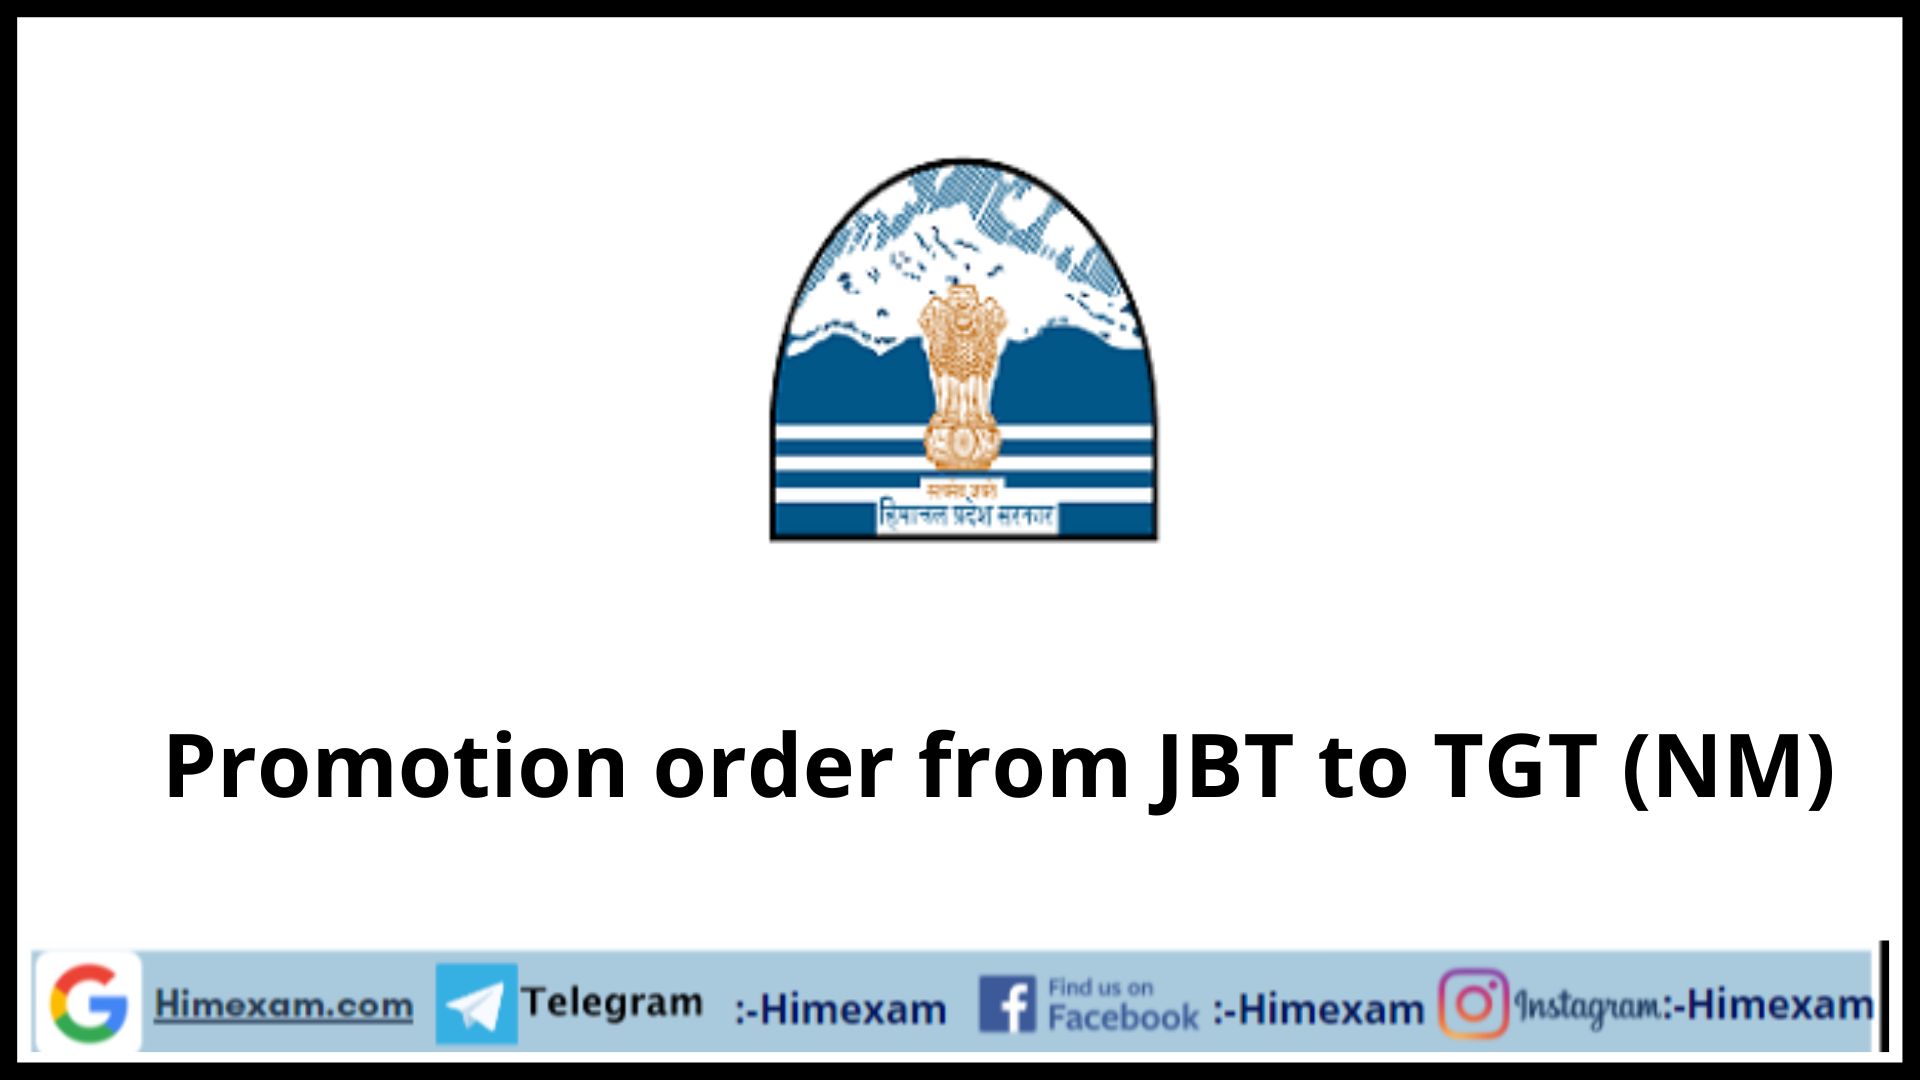 Promotion order from JBT to TGT (NM)